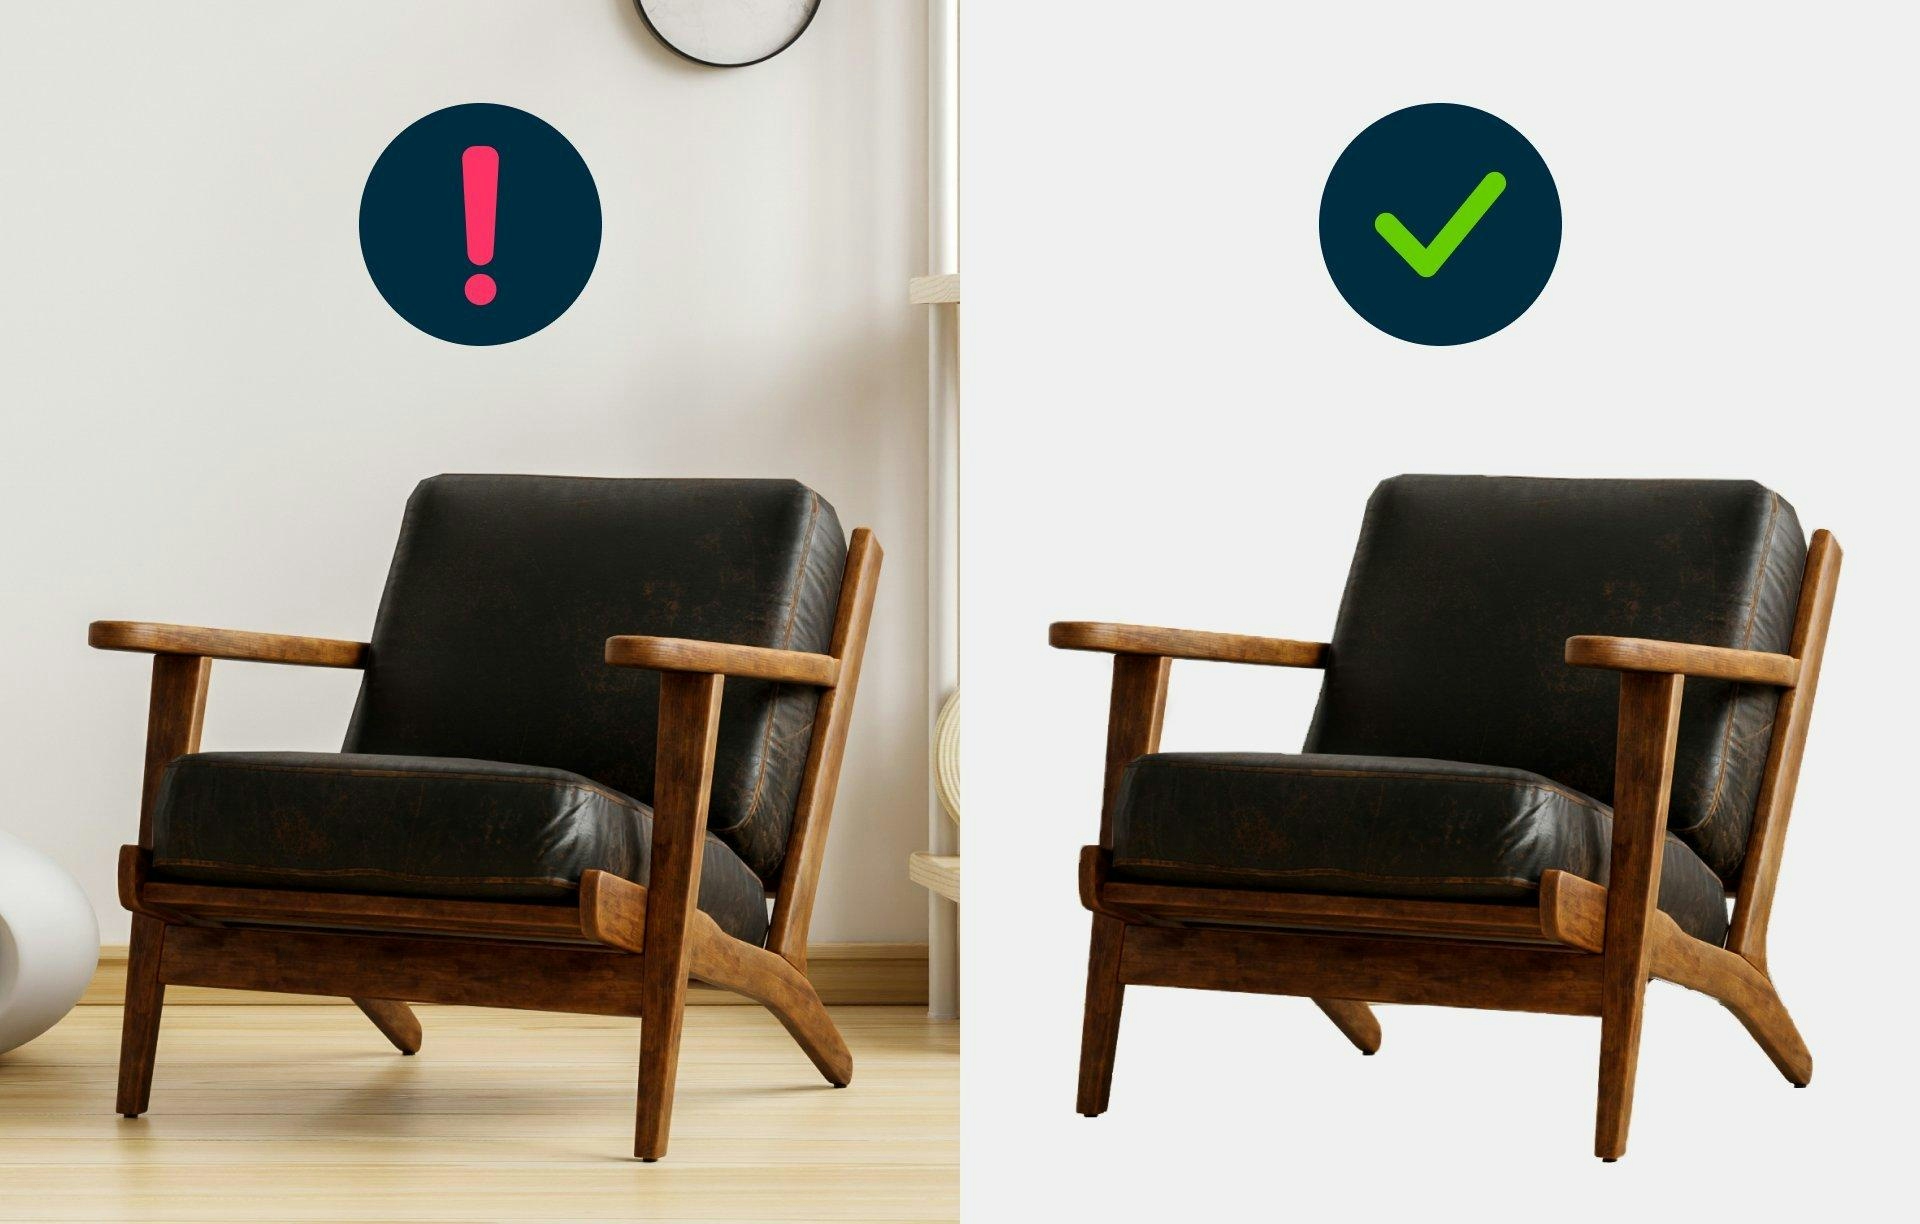 before and after image of chair when background is removed and replaced with white